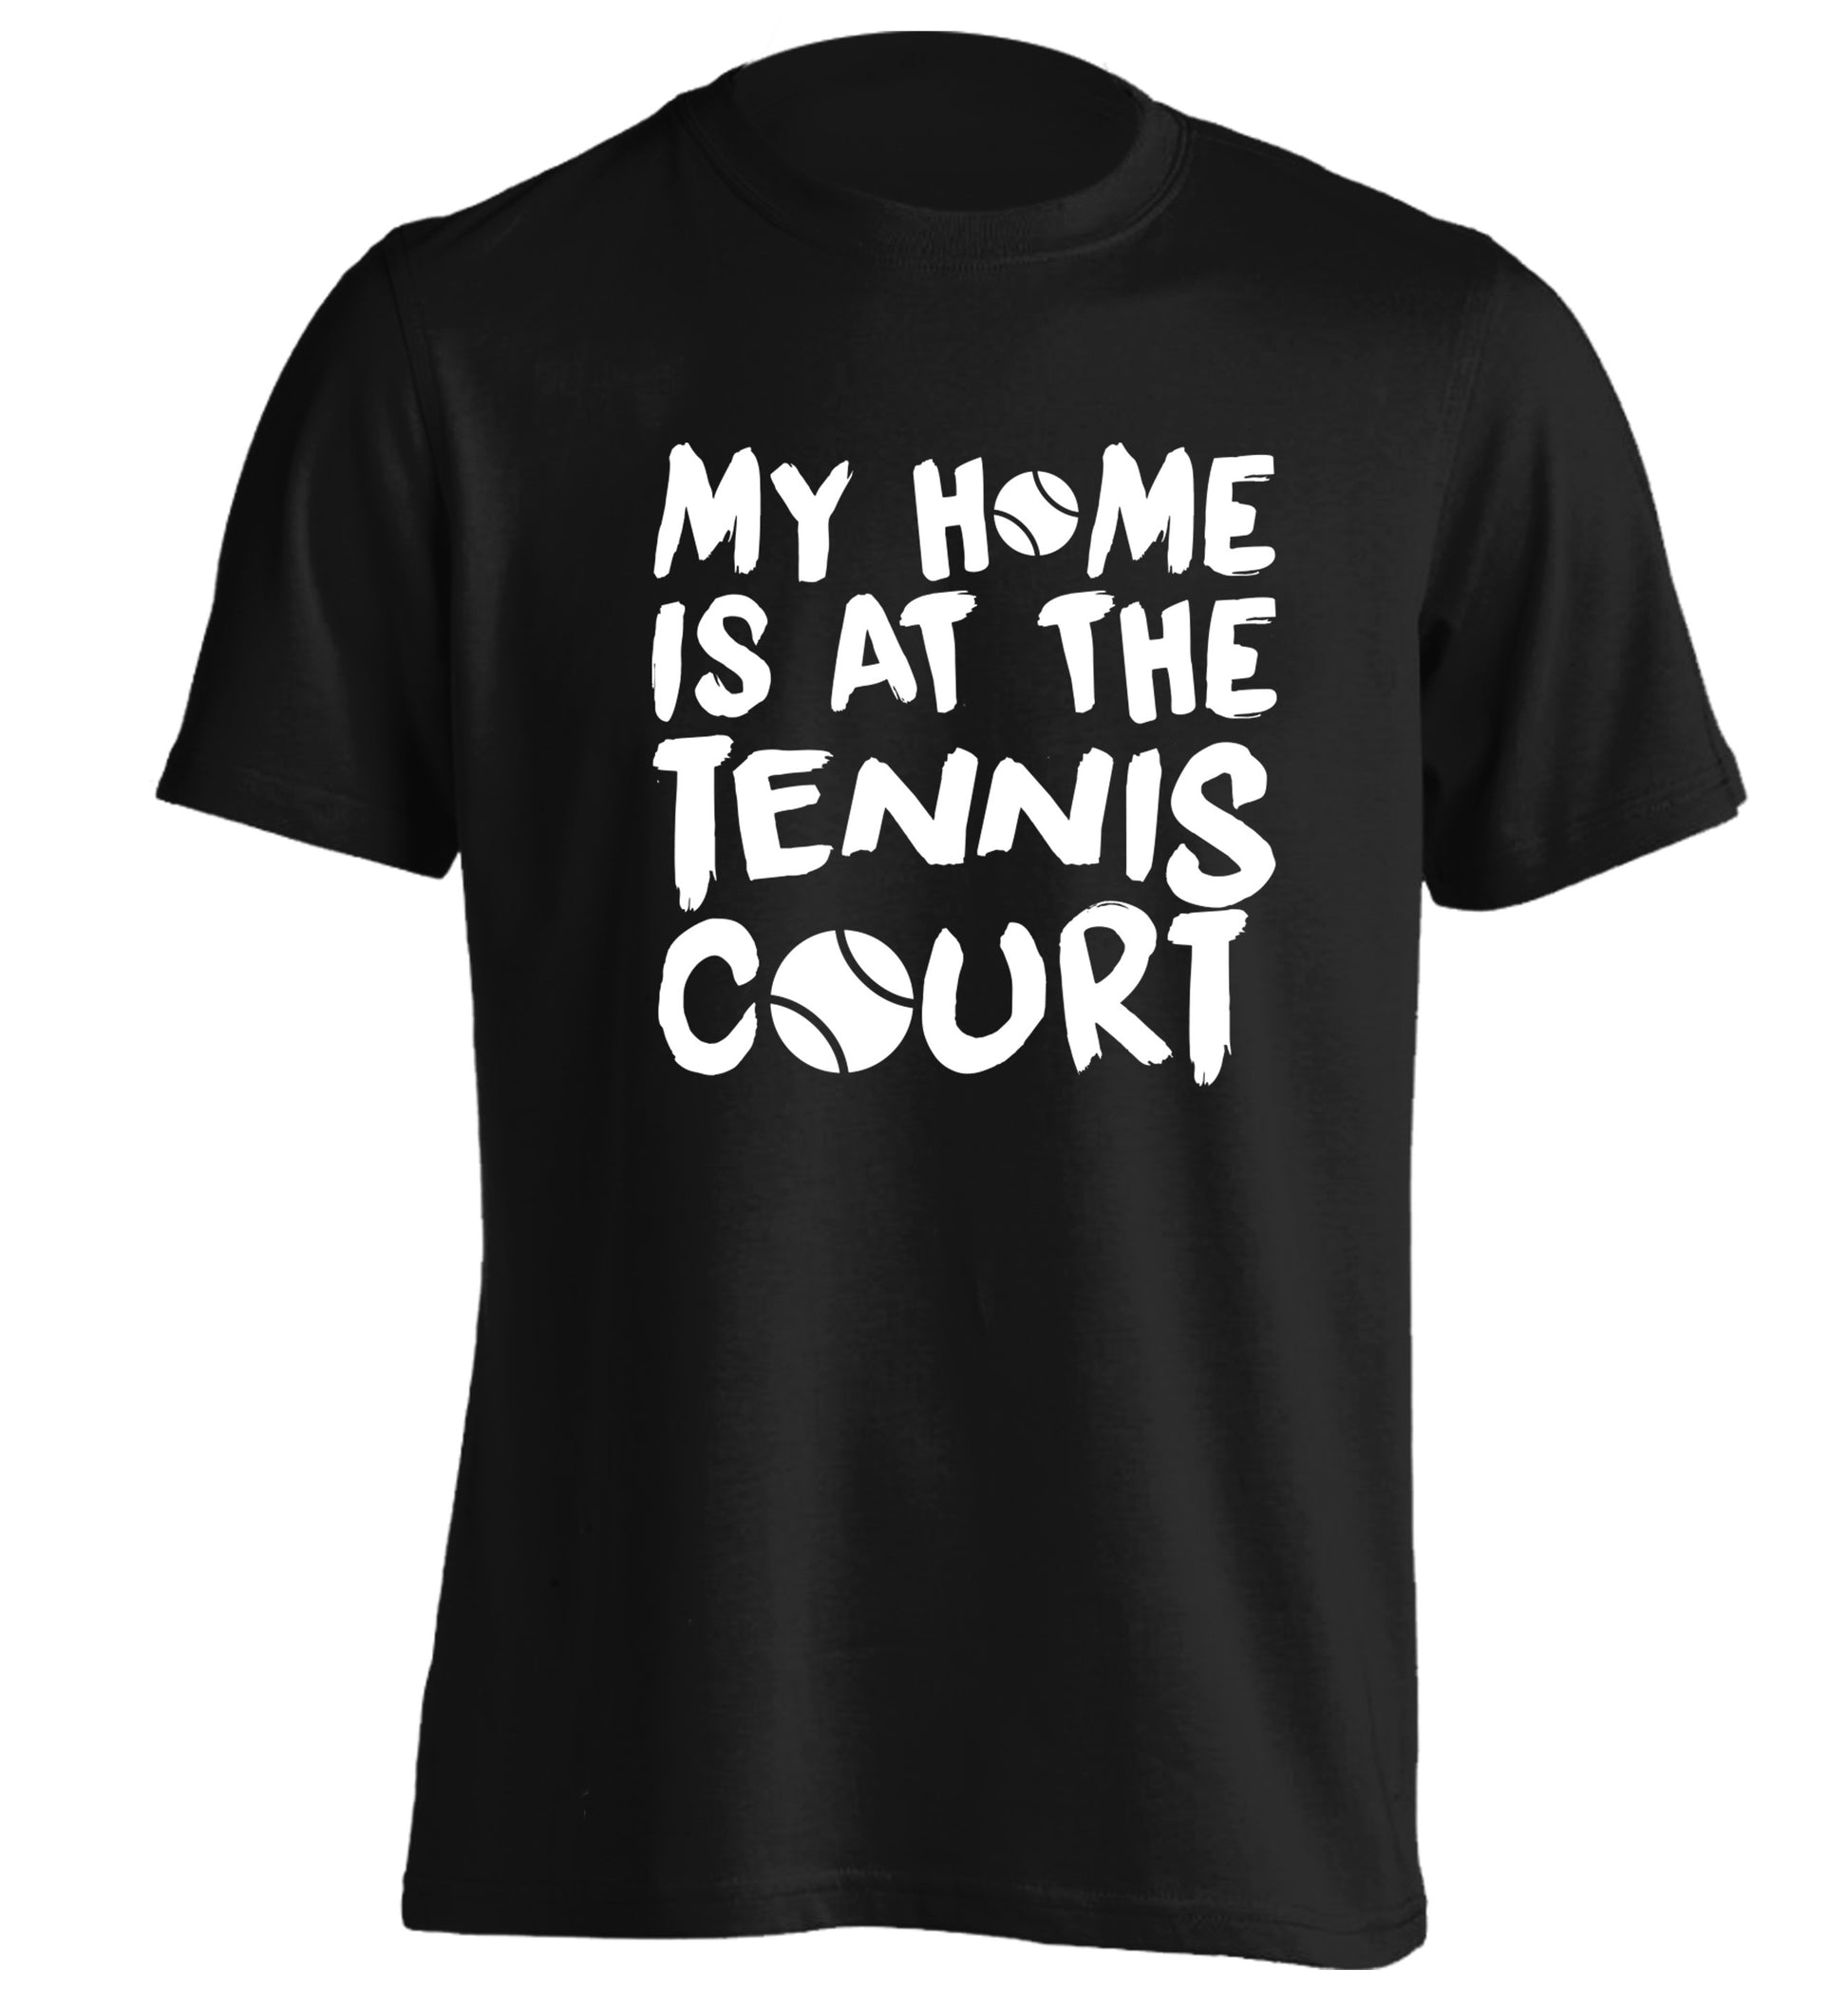 My home is at the tennis court adults unisex black Tshirt 2XL